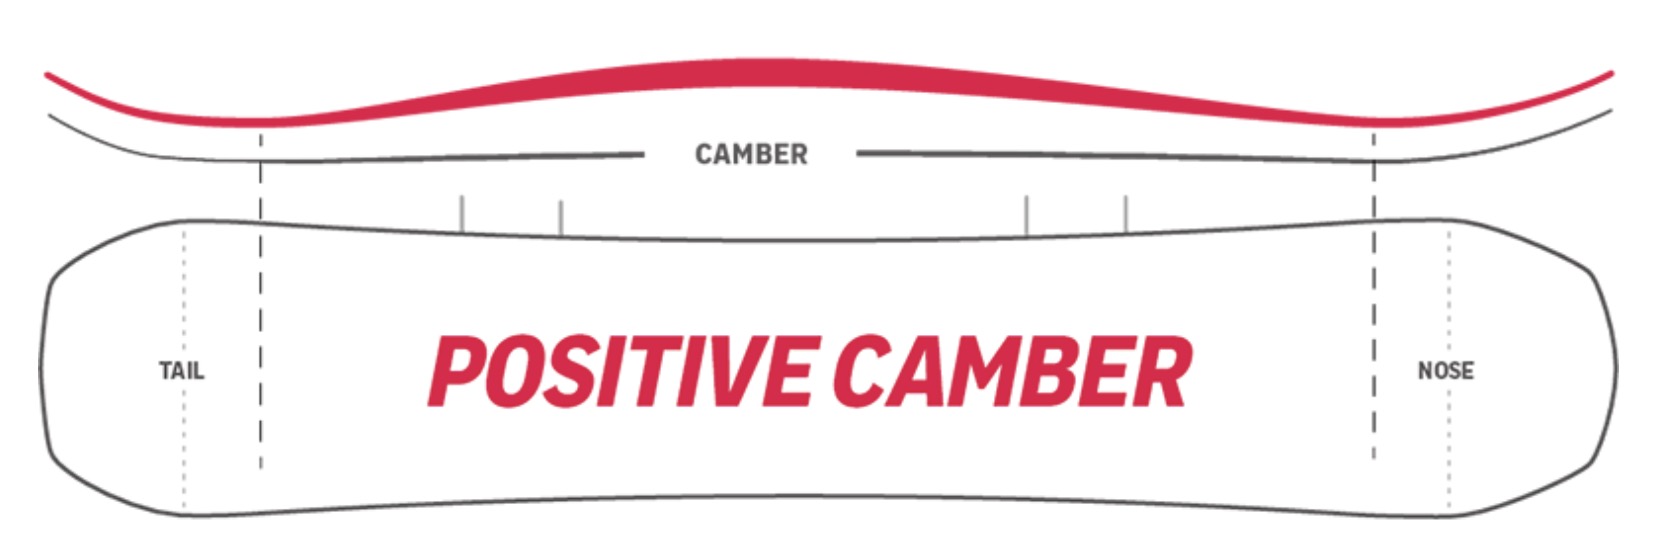 ndk positive camber